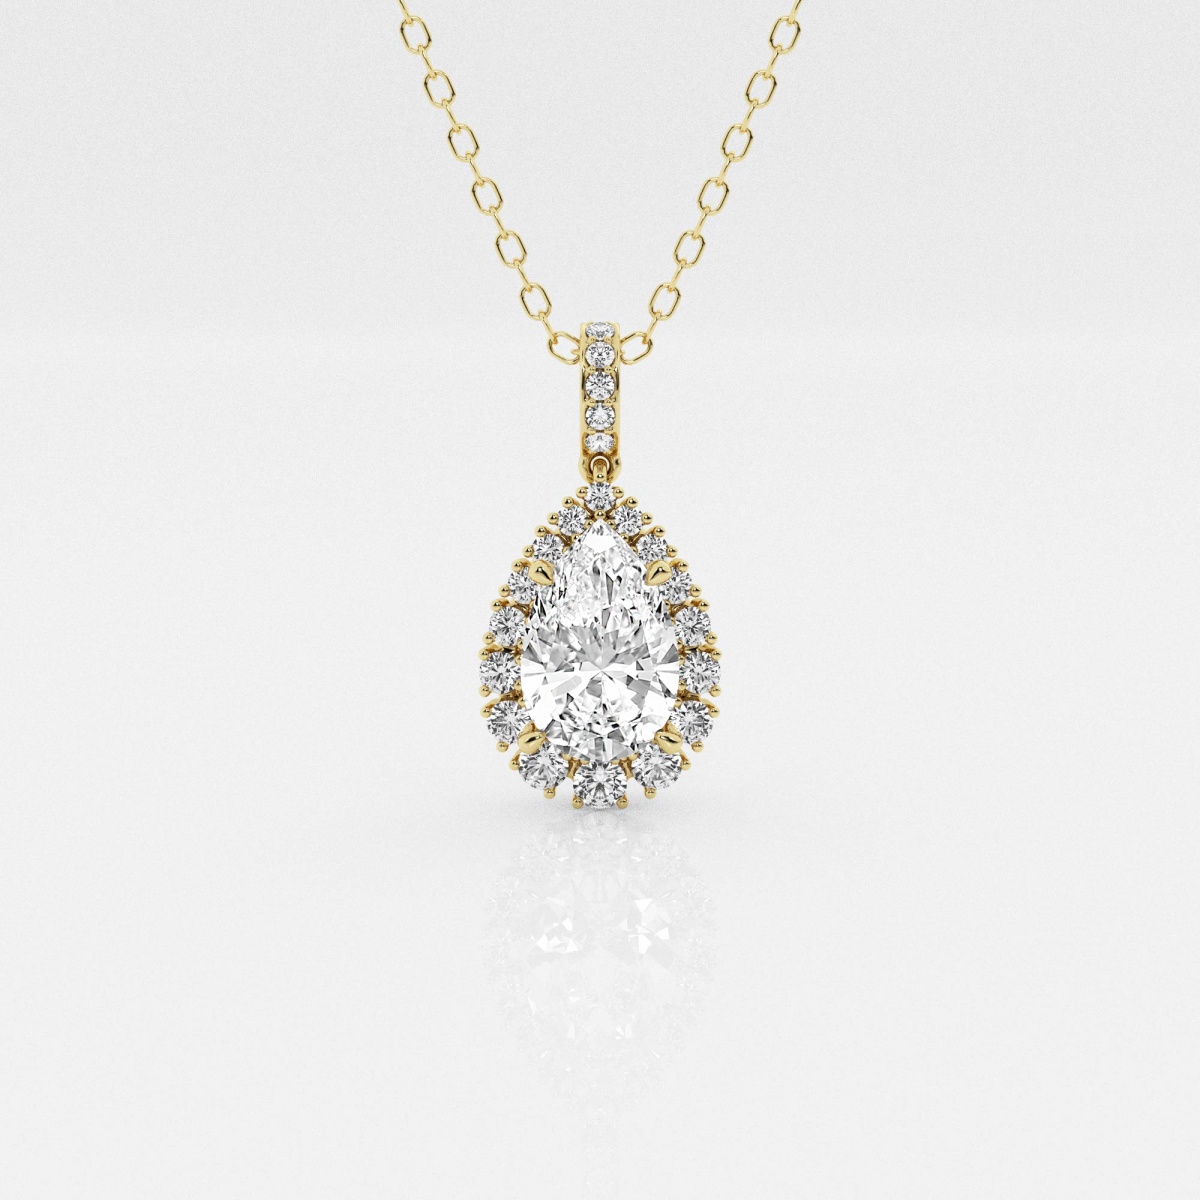 Badgley Mischka Near-Colorless 2 1/4 ctw Pear Lab Grown Diamond Solitaire Pendant with Adjustable Chain